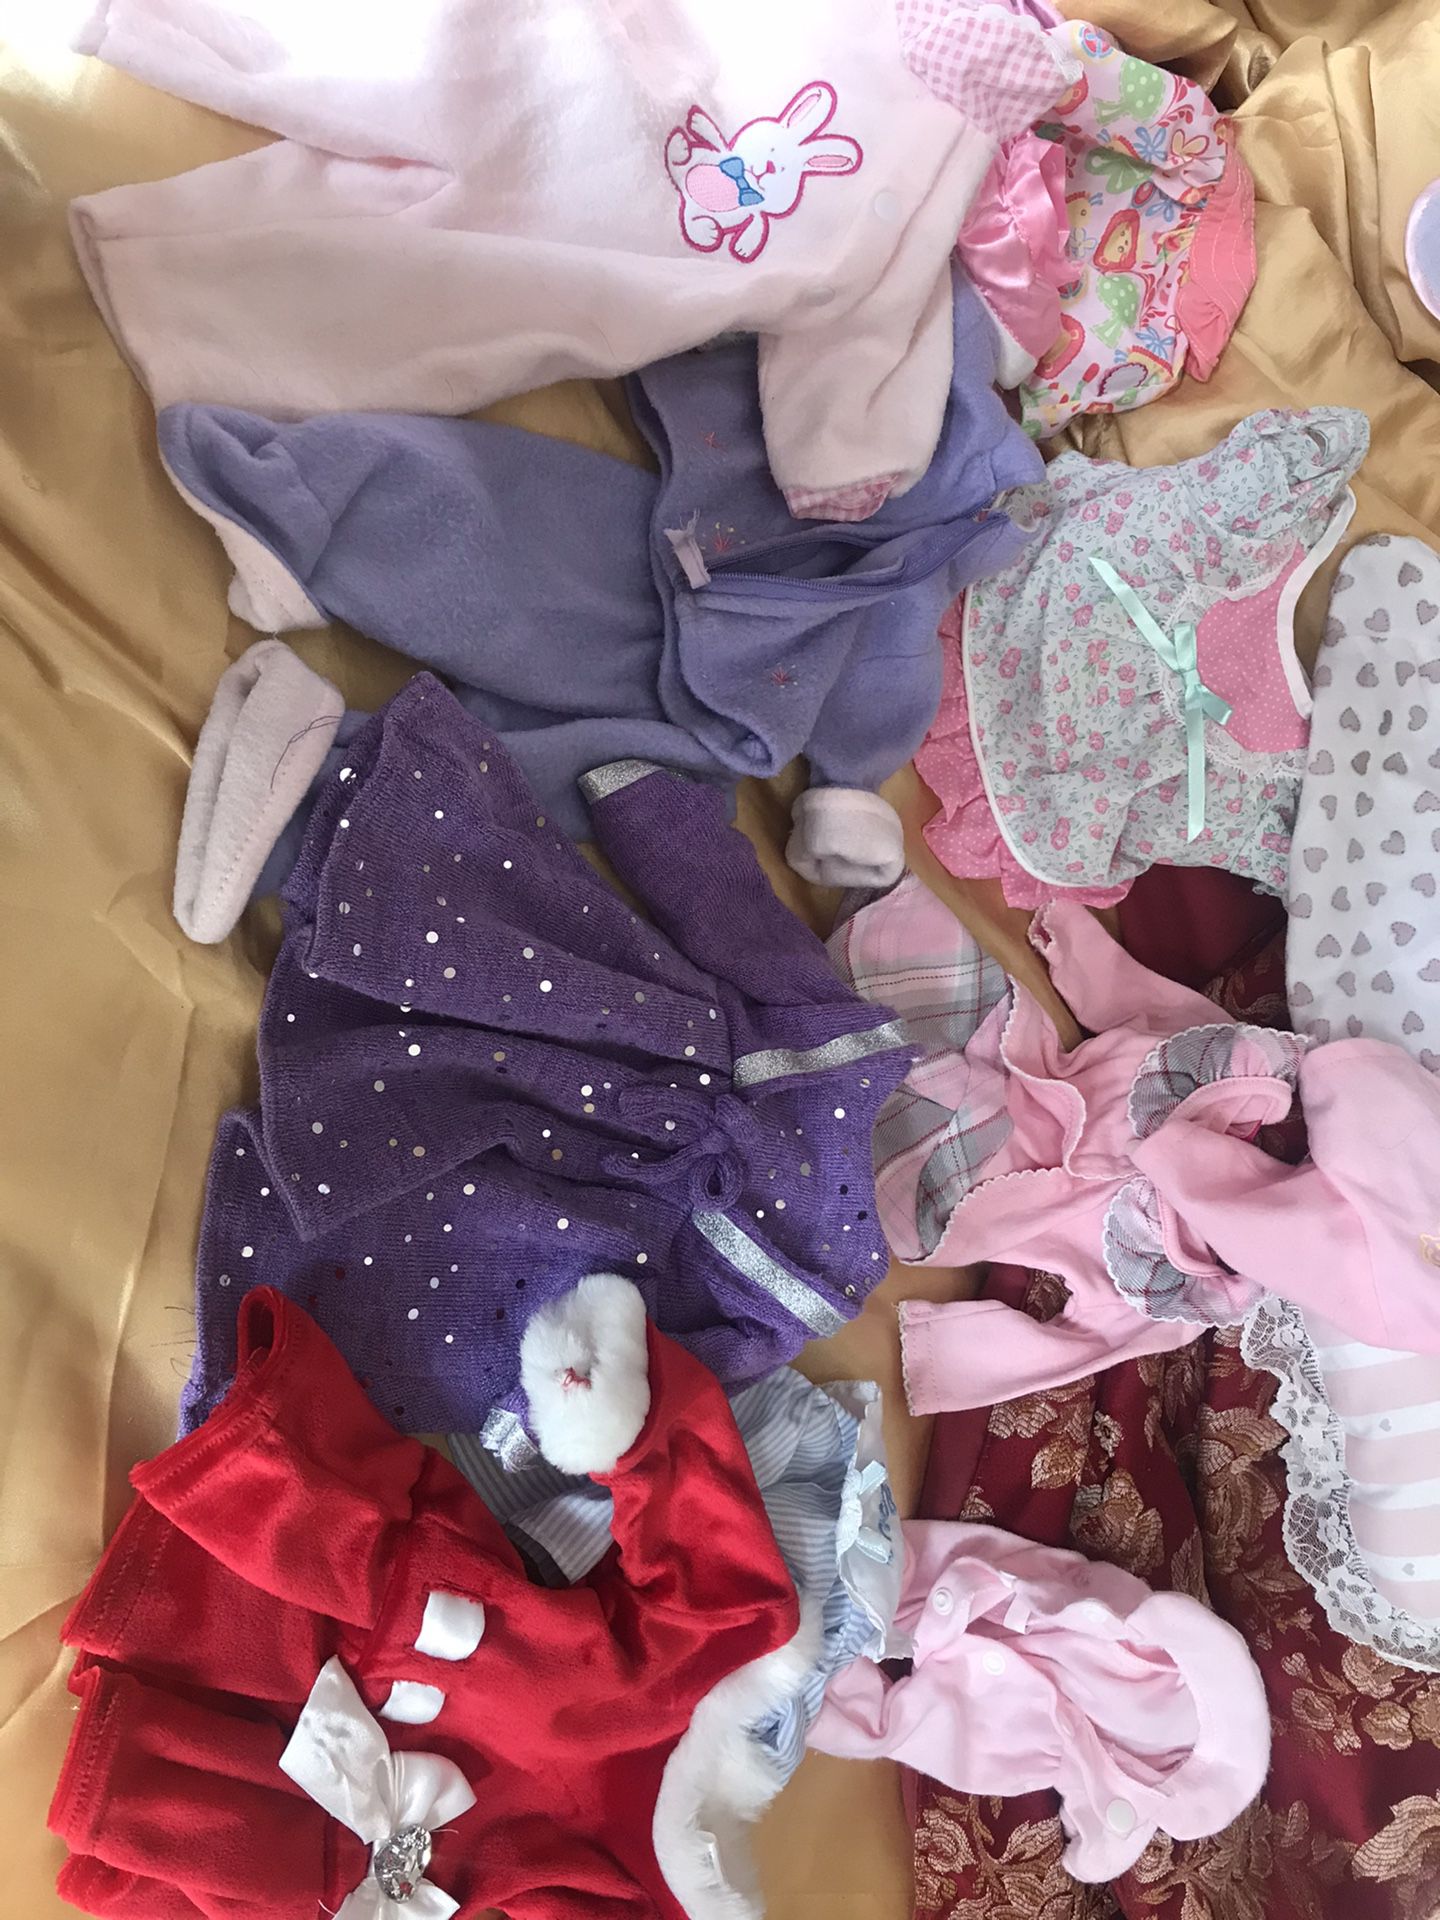 Baby doll clothes and American girl doll size clothes